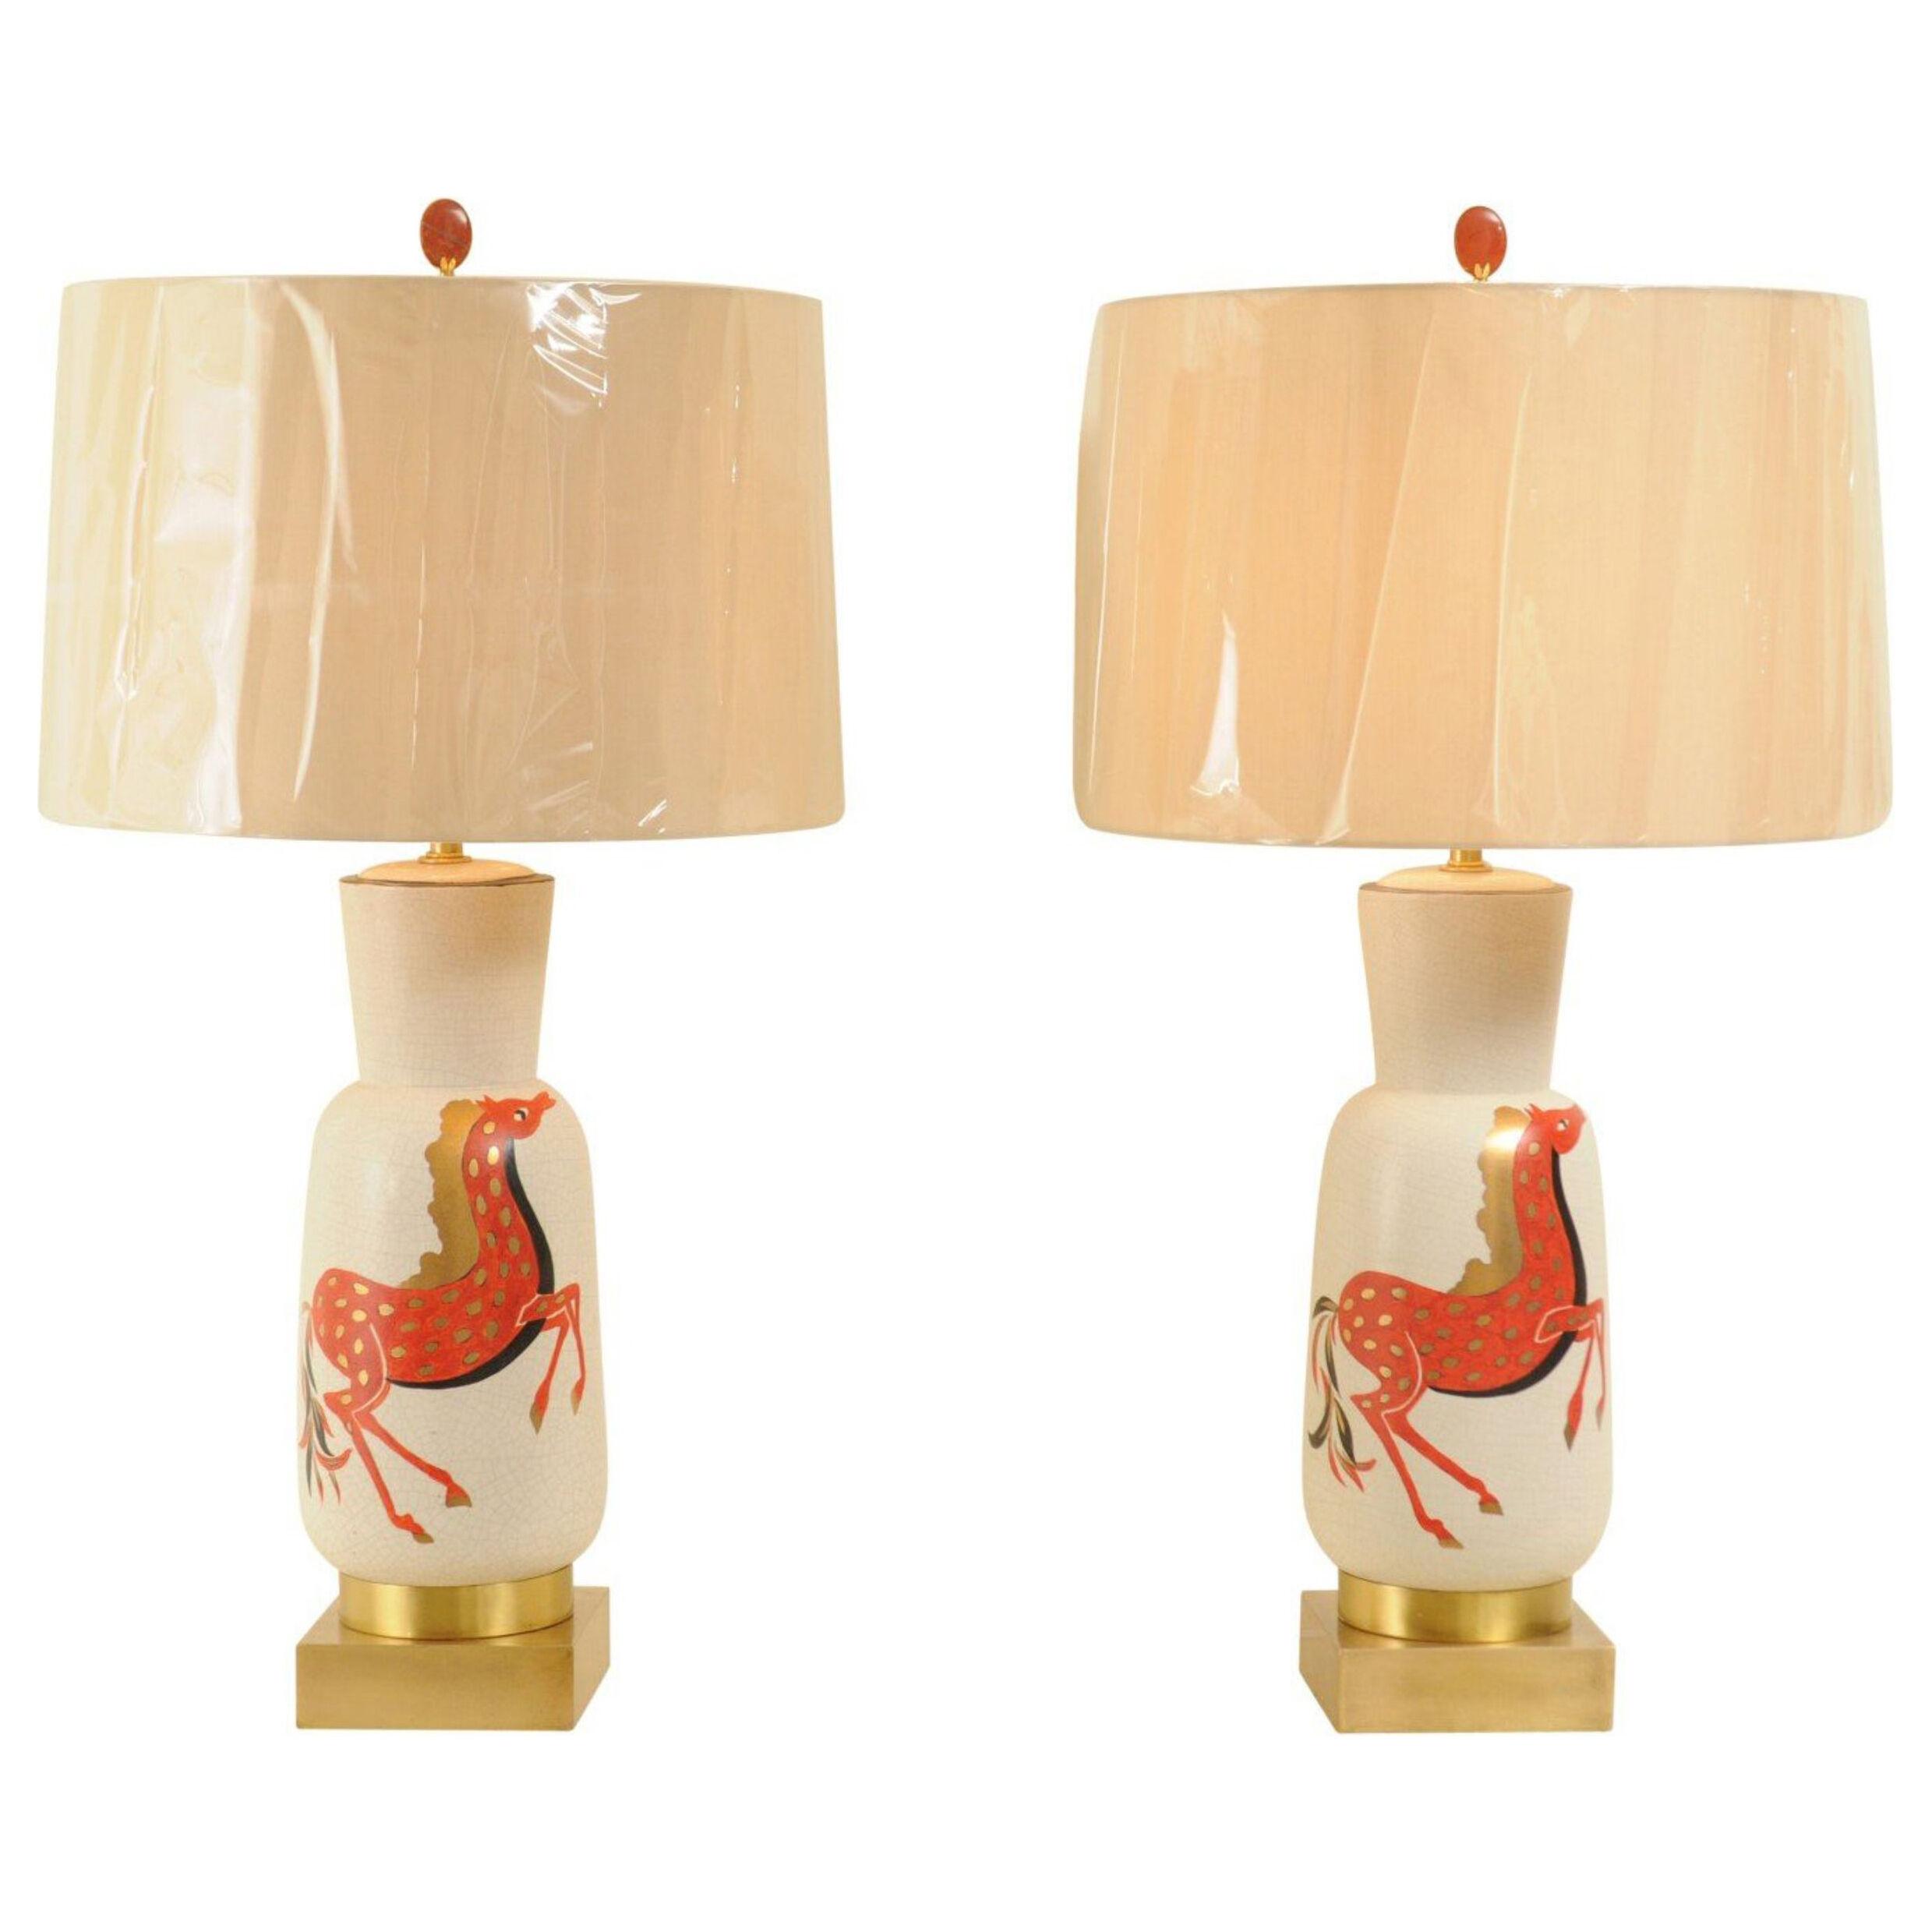 Spectacular Pair of Marbro Lamps by Ugo Zaccagnini, Italy, circa 1955